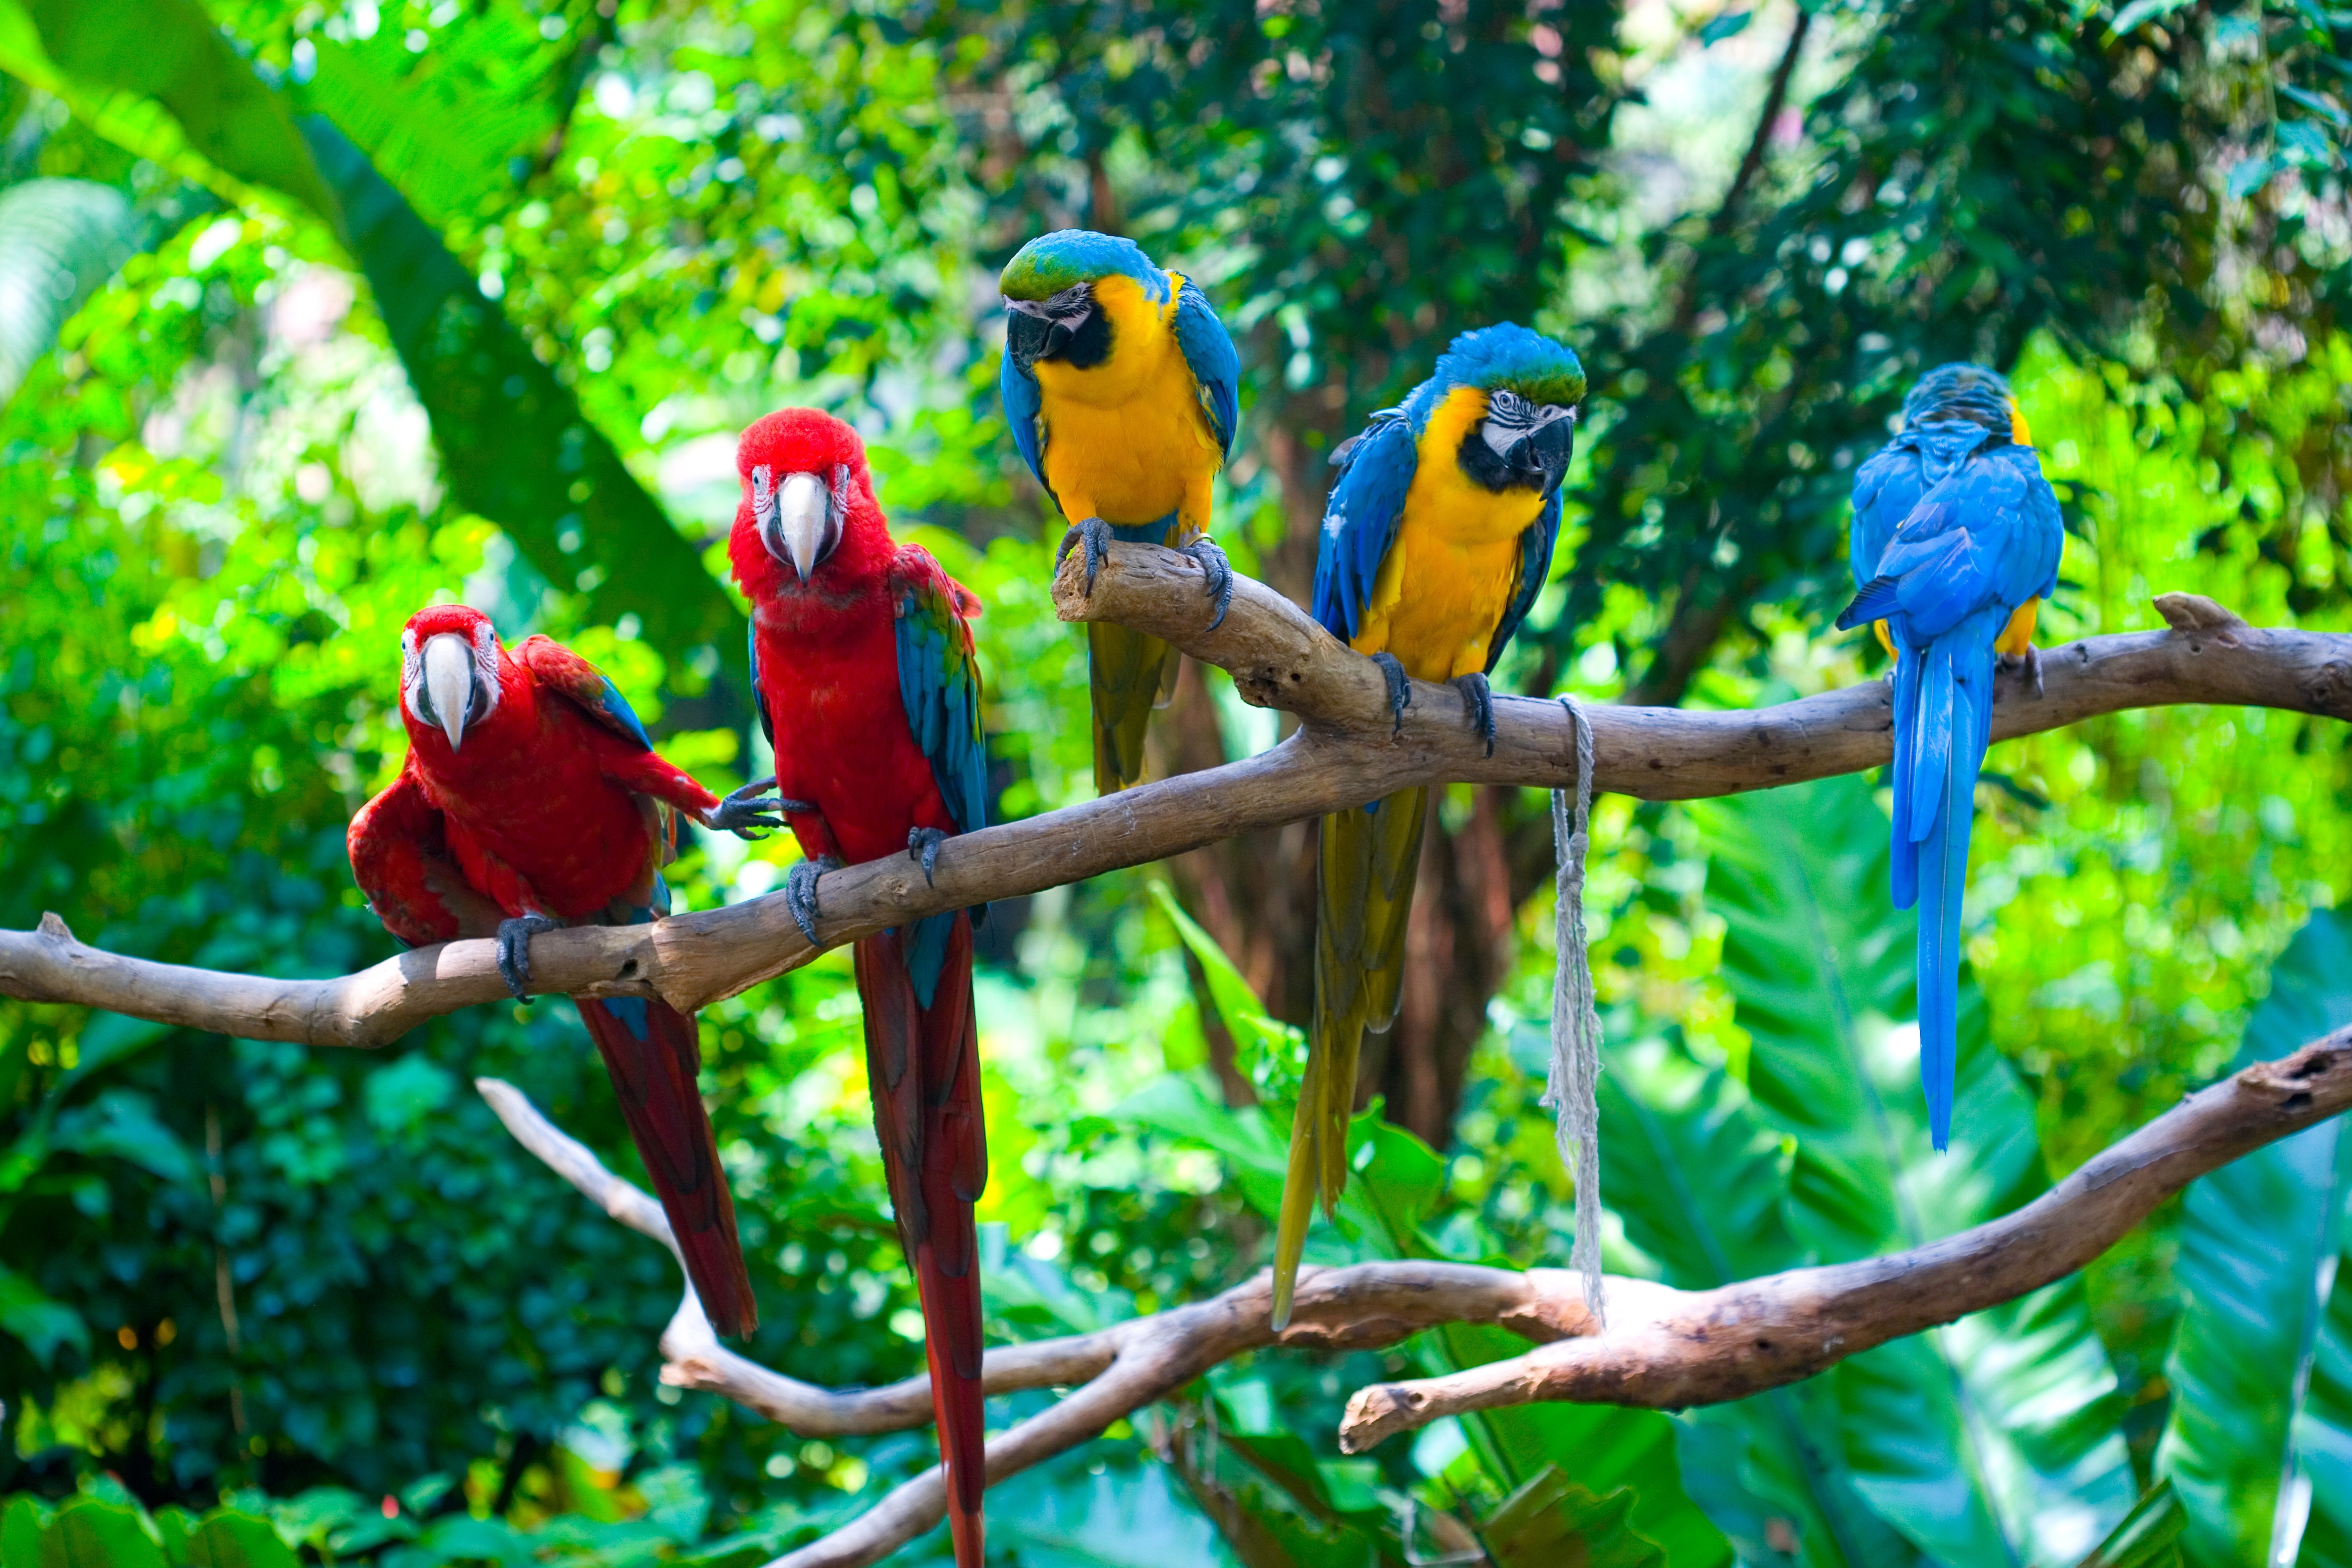 macaw, animal, bird, blue and yellow macaw, parrot, red and green macaw, birds